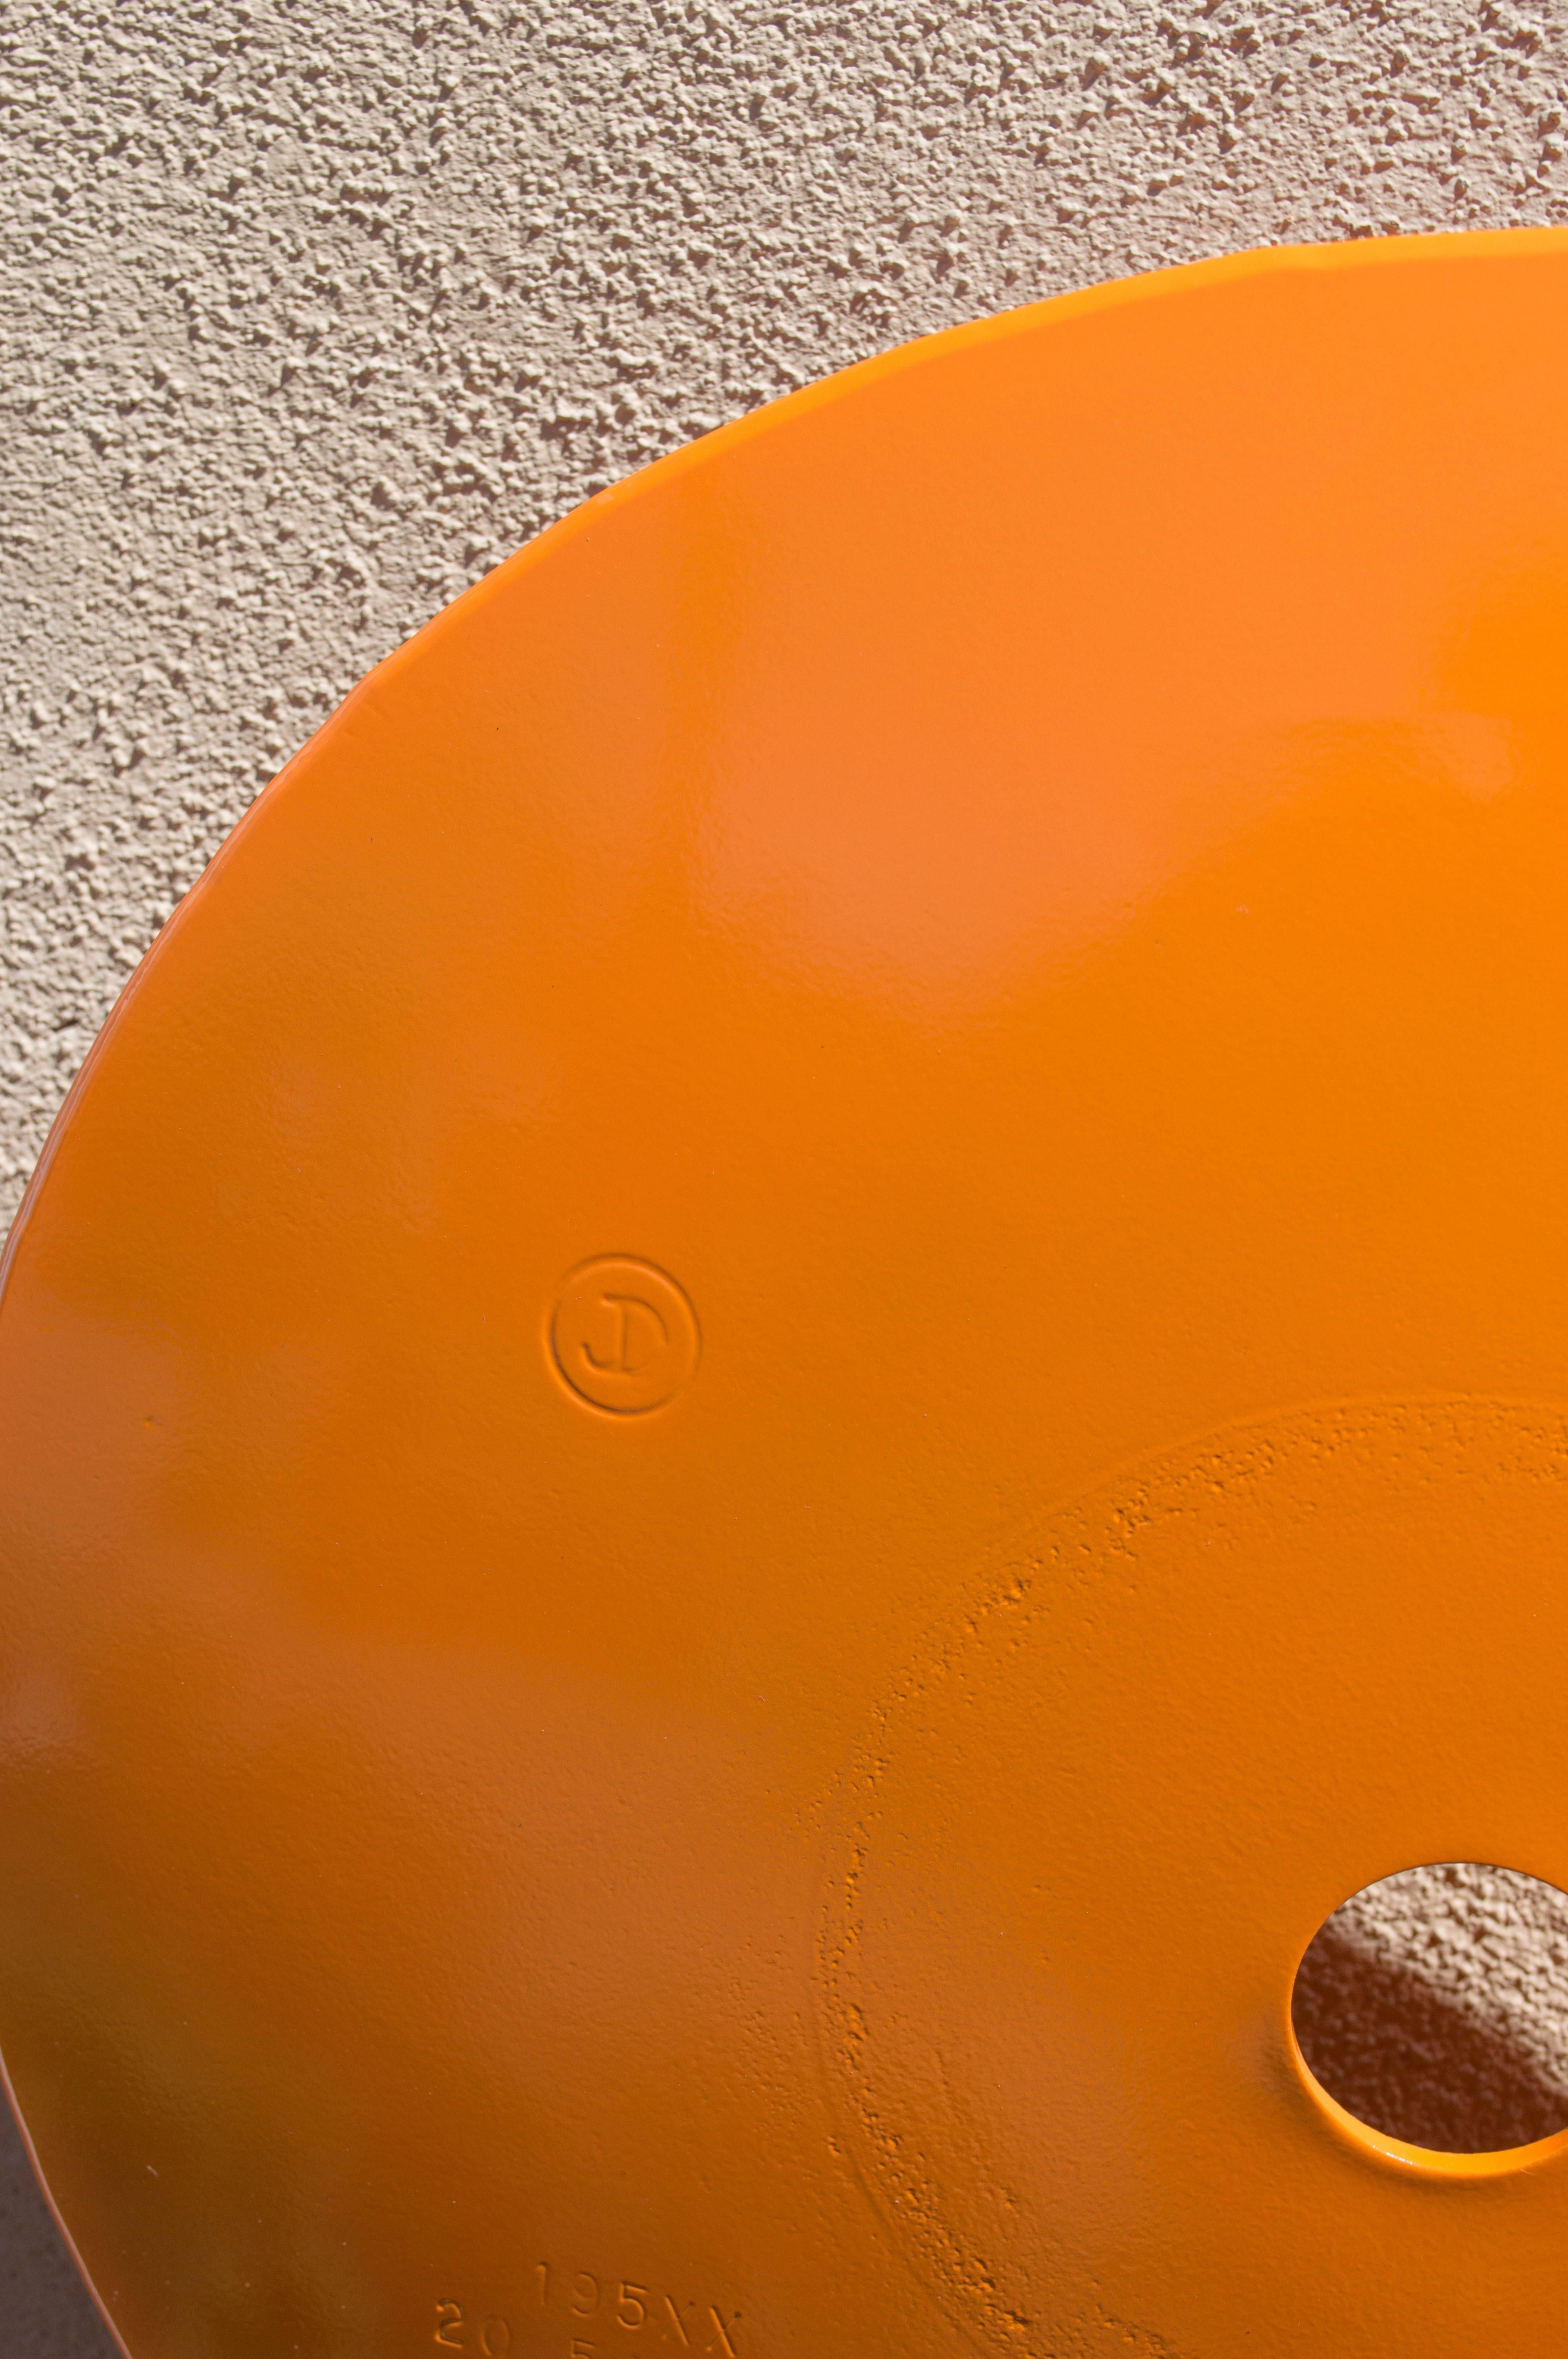 Terrace Disc, light orange - Orange Abstract Sculpture by Michael Freed and Adam Rosen